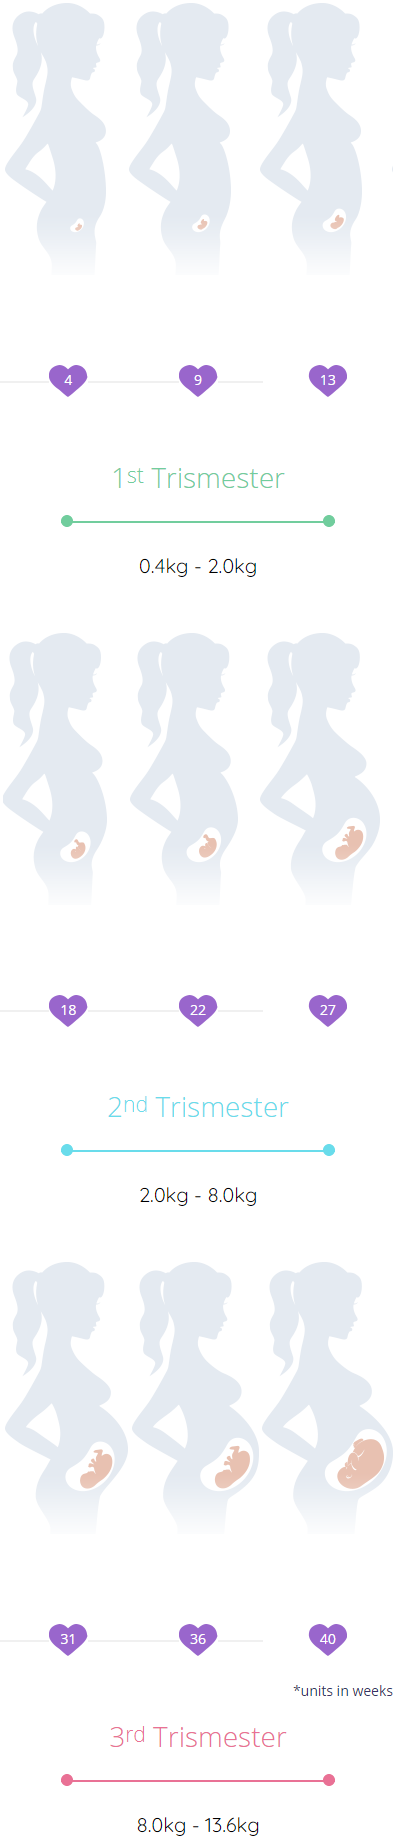 Surrogacy with donor’s oocytes -Trimester Chart 2